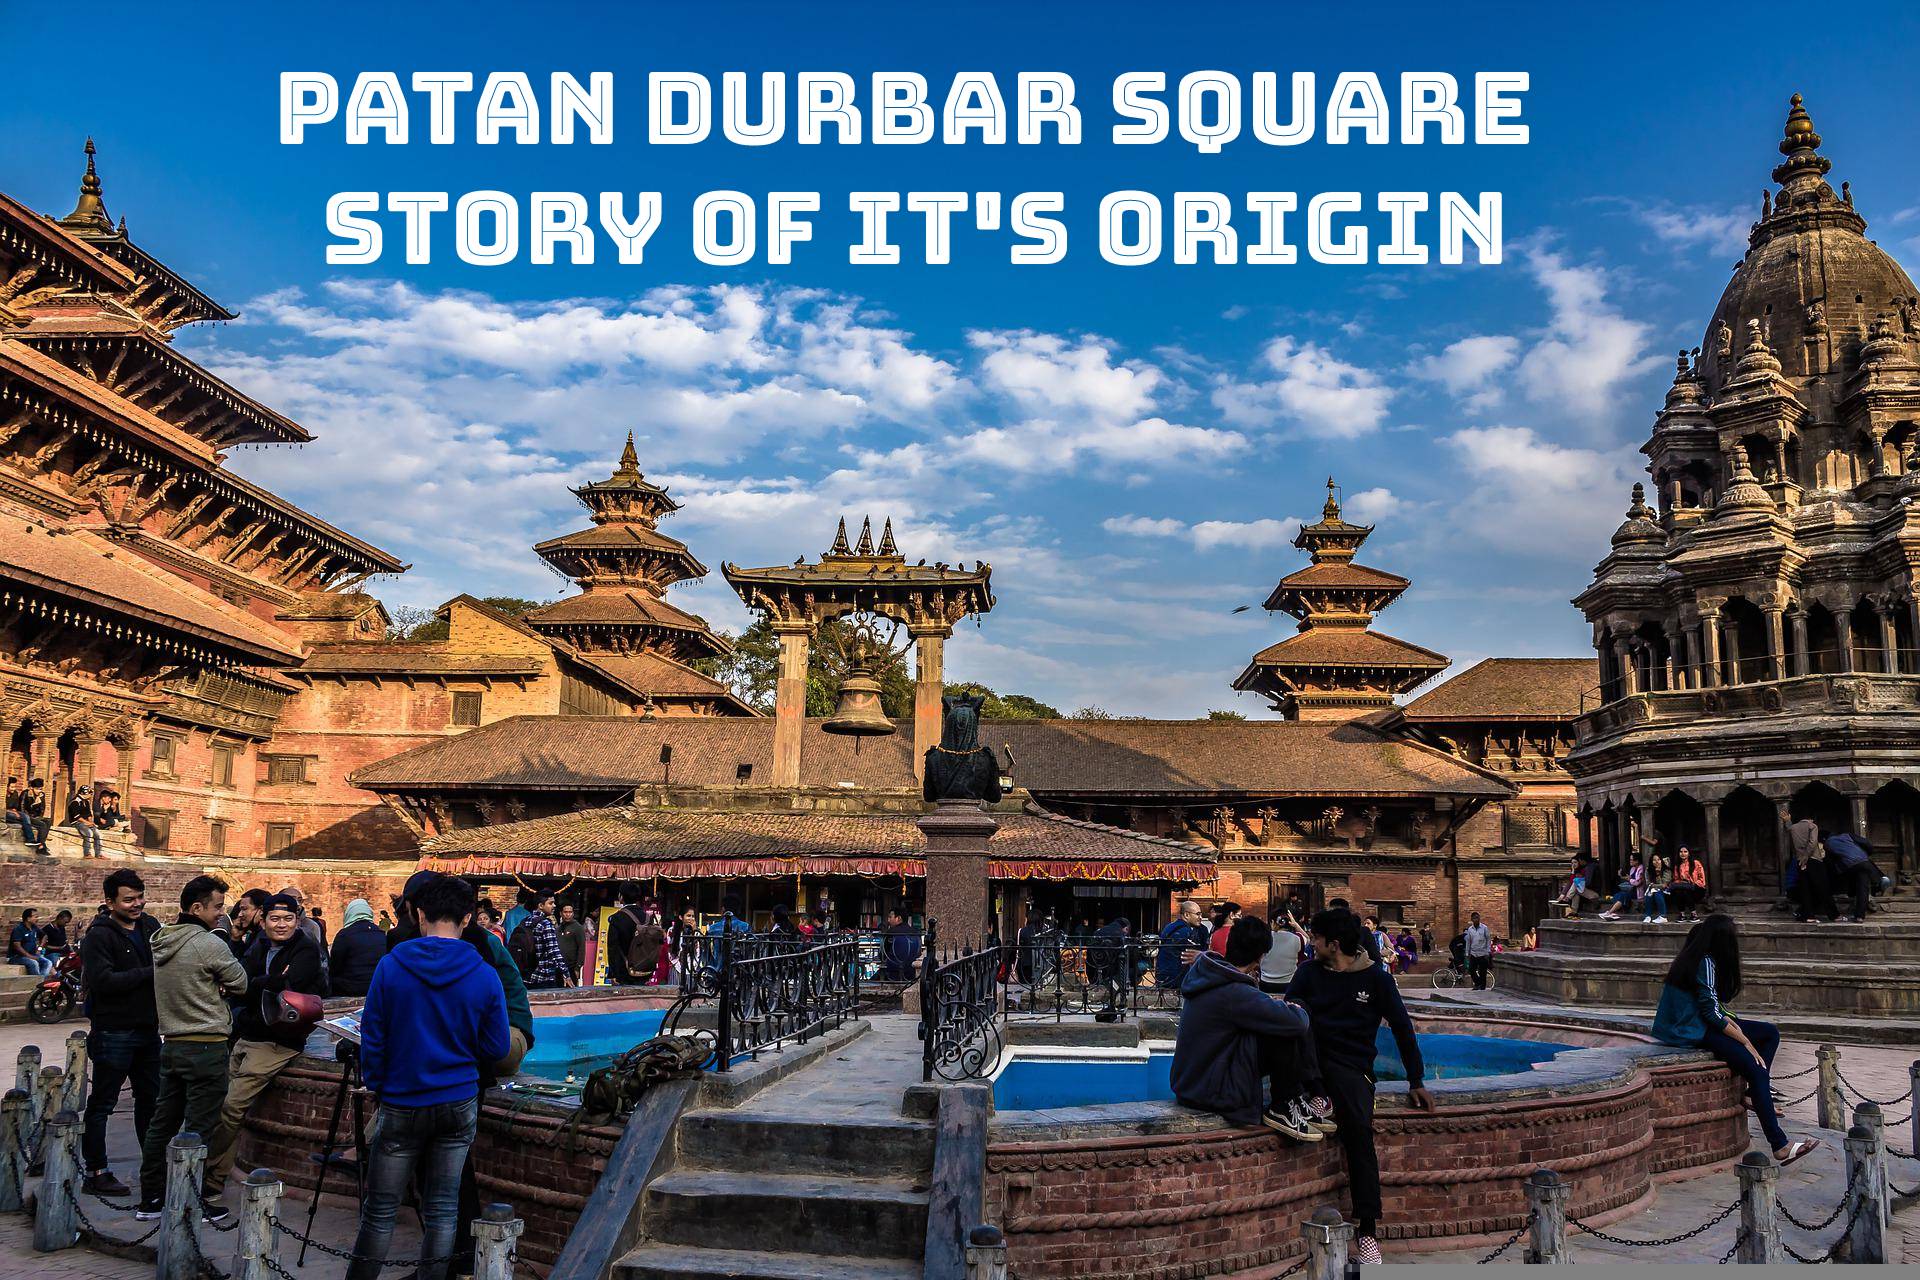 Patan durbar square and story of its origin